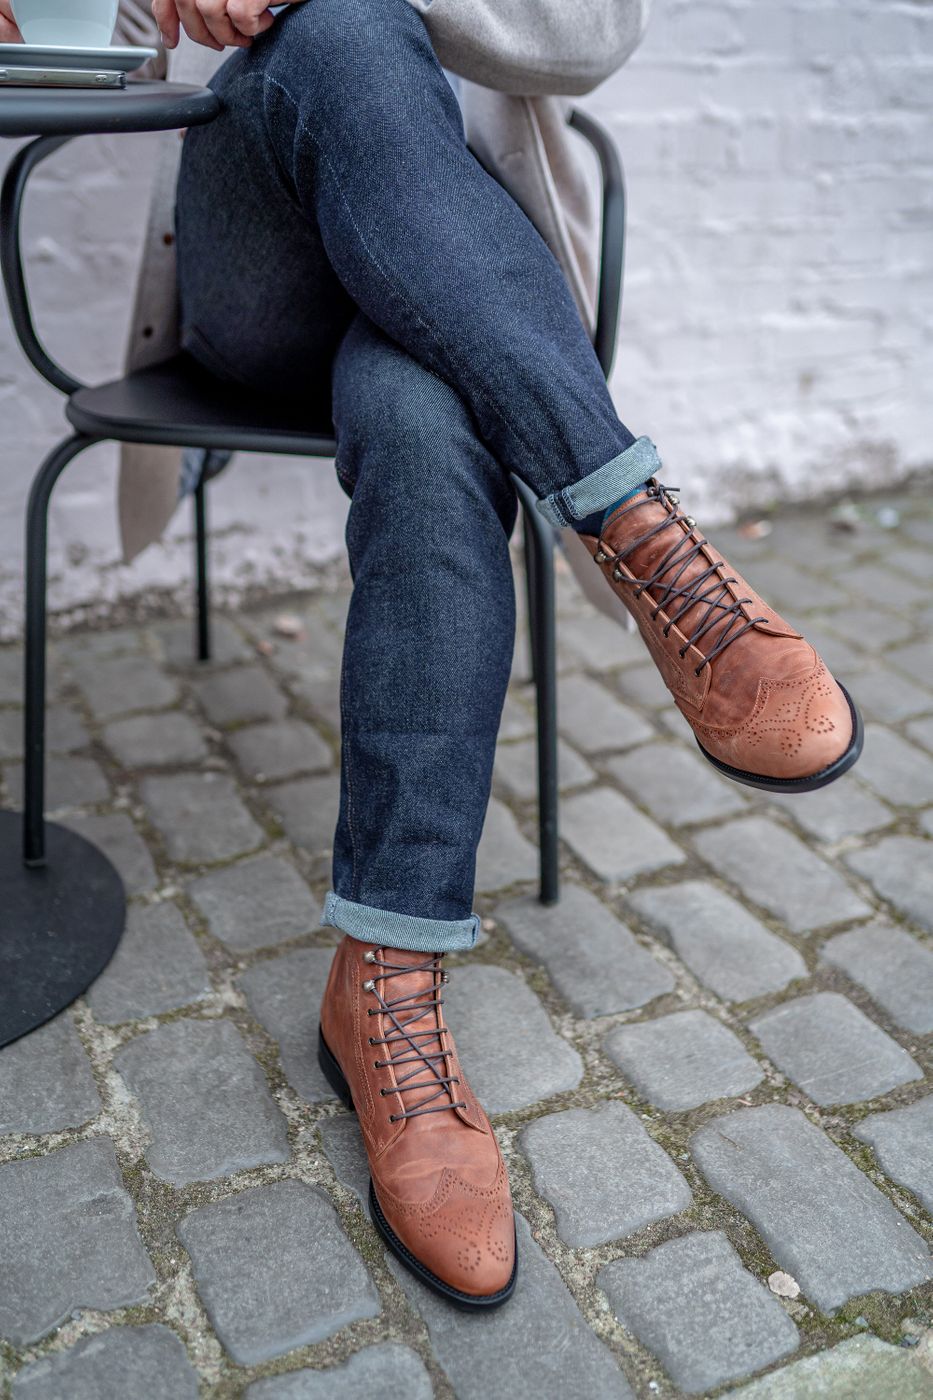 How to wear boots with jeans: 4 style combinations 